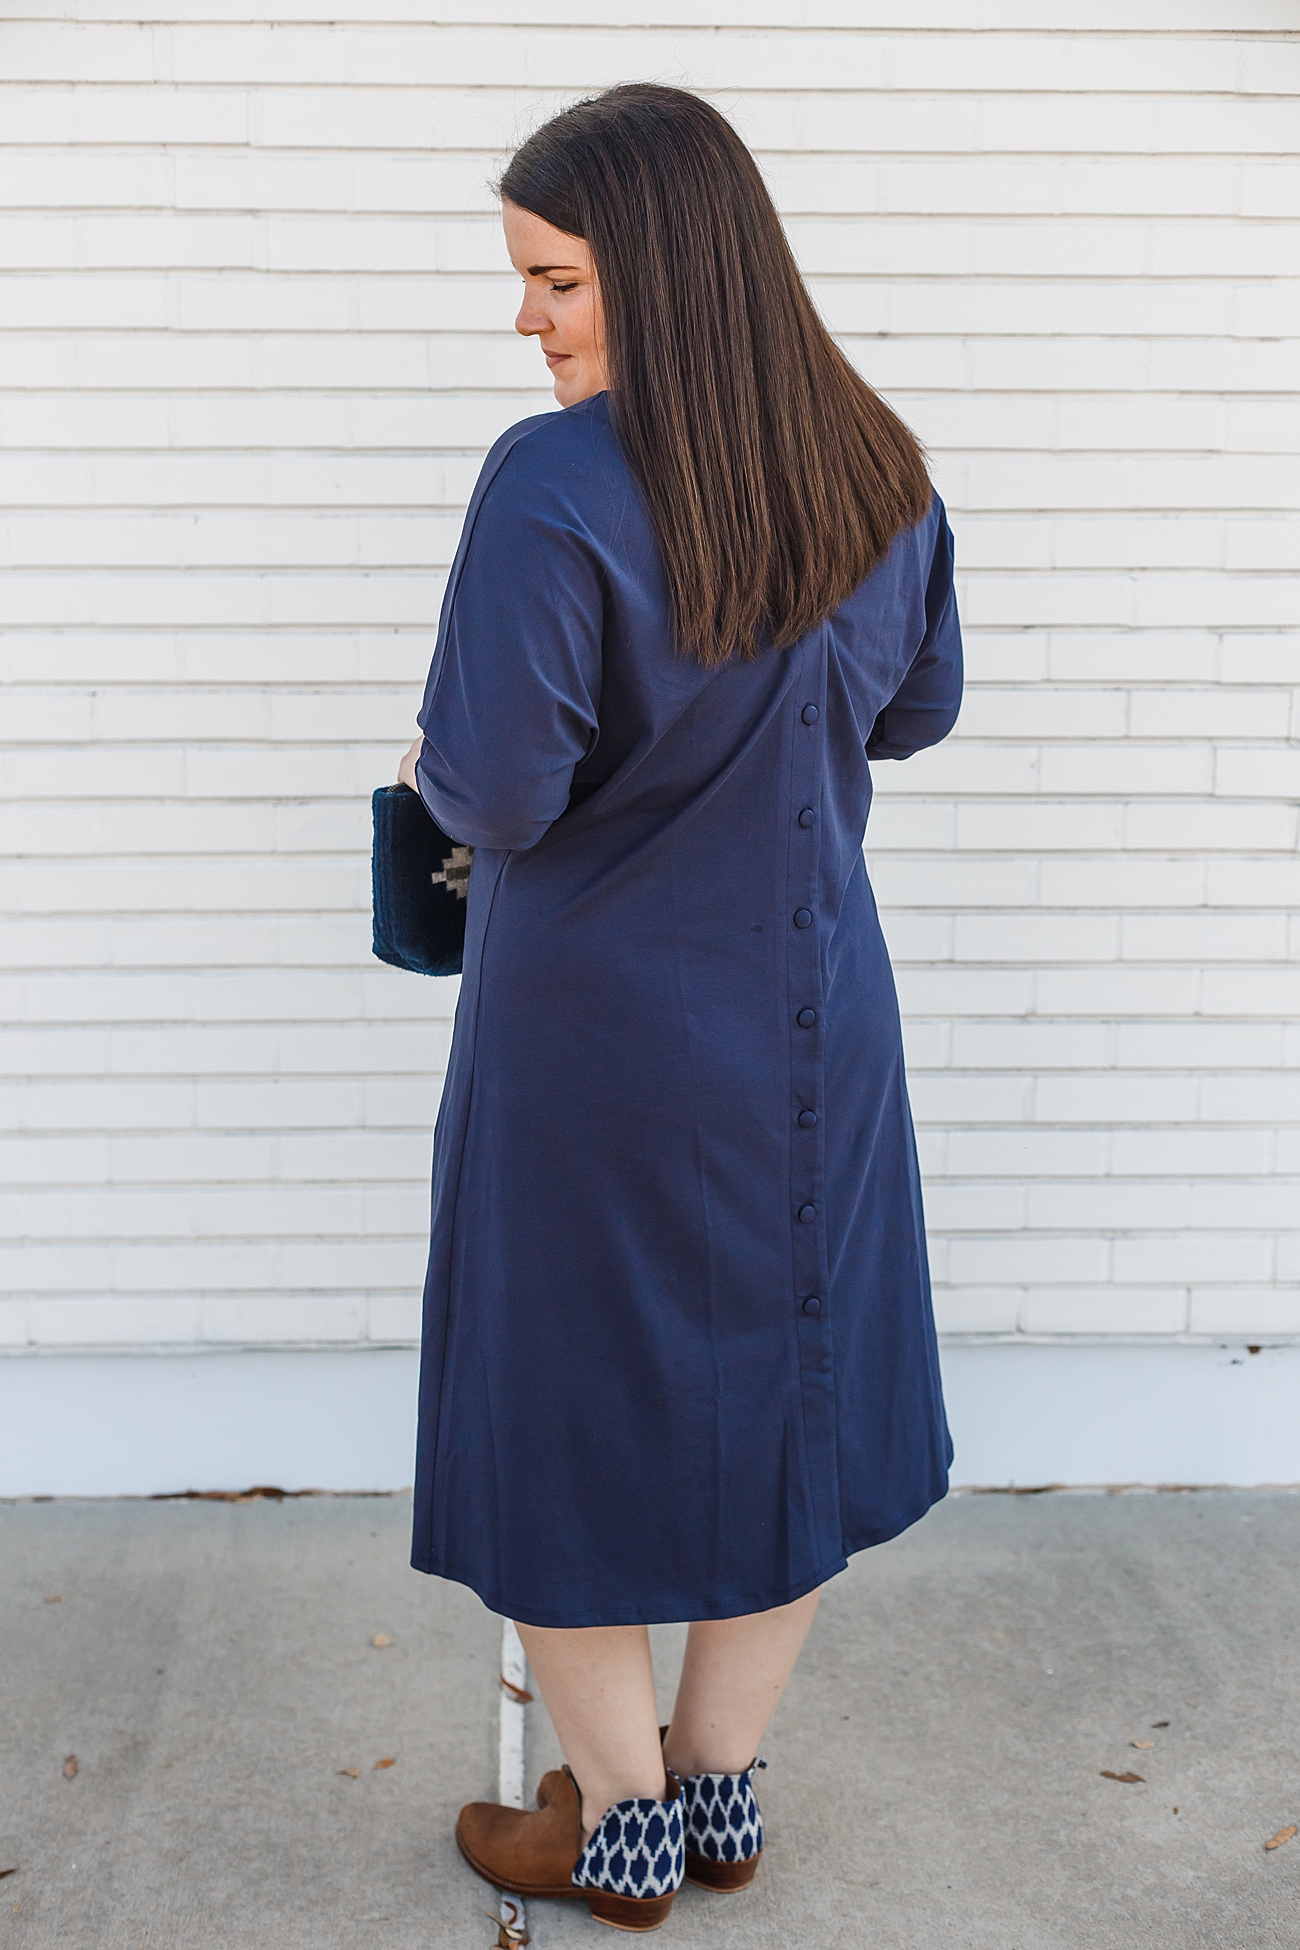 The Elegantees "Molly" Dress is Here! | Beautiful, versatile, ethically made dress (41)